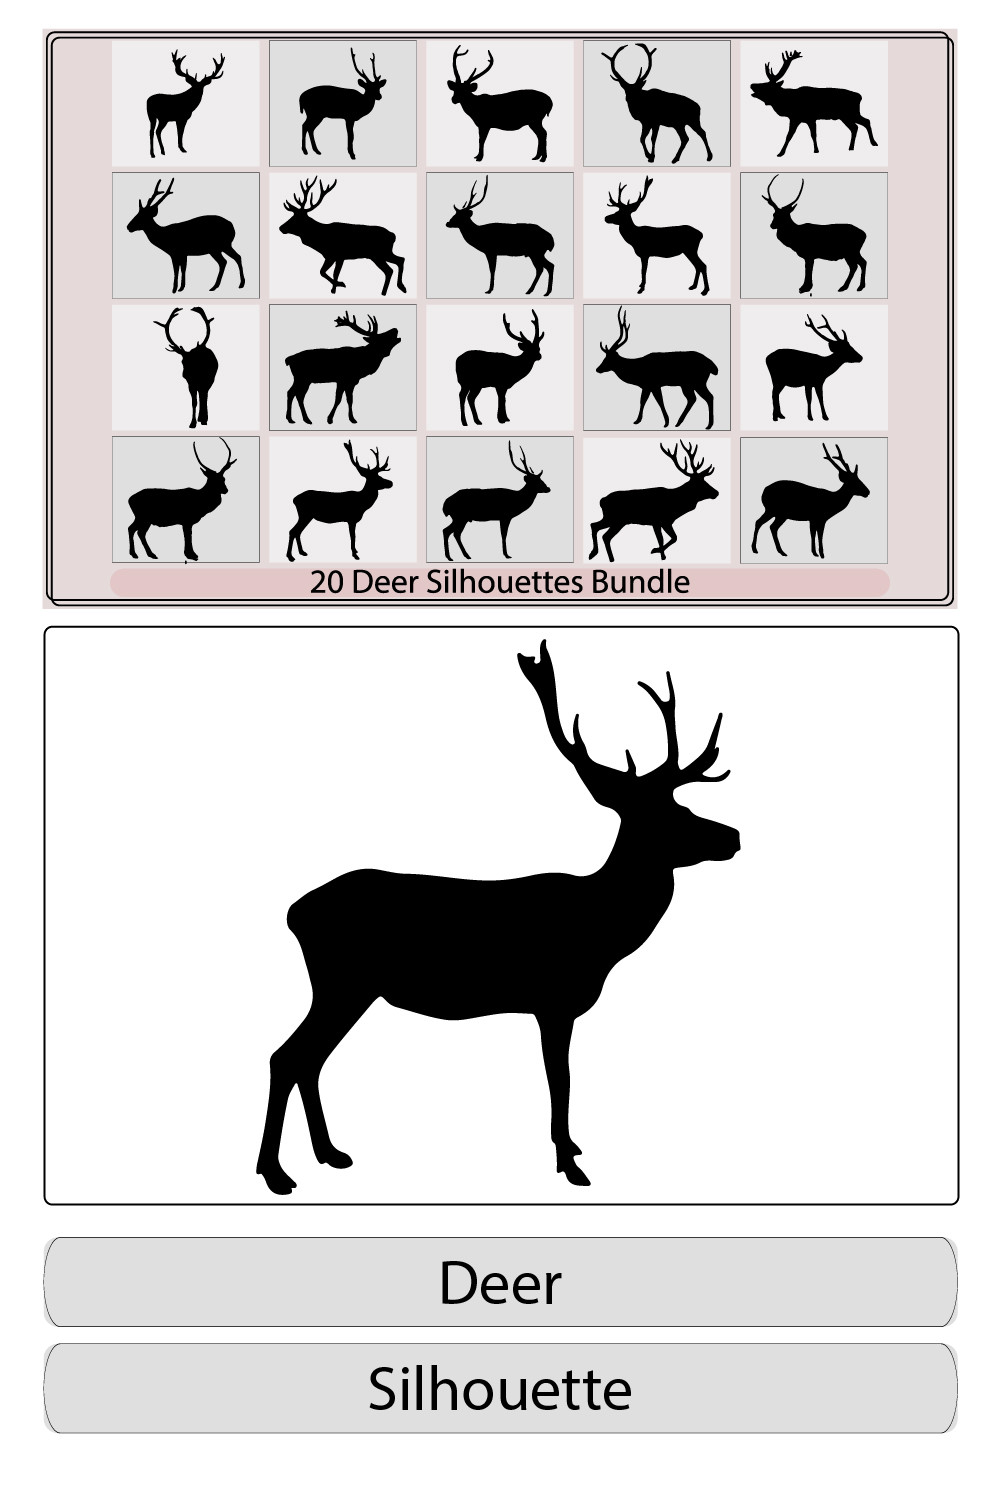 Deer vector silhouette iconssilhouettes of deers,silhouette of head of reindeer,Deer silhouette vector illustration pinterest preview image.